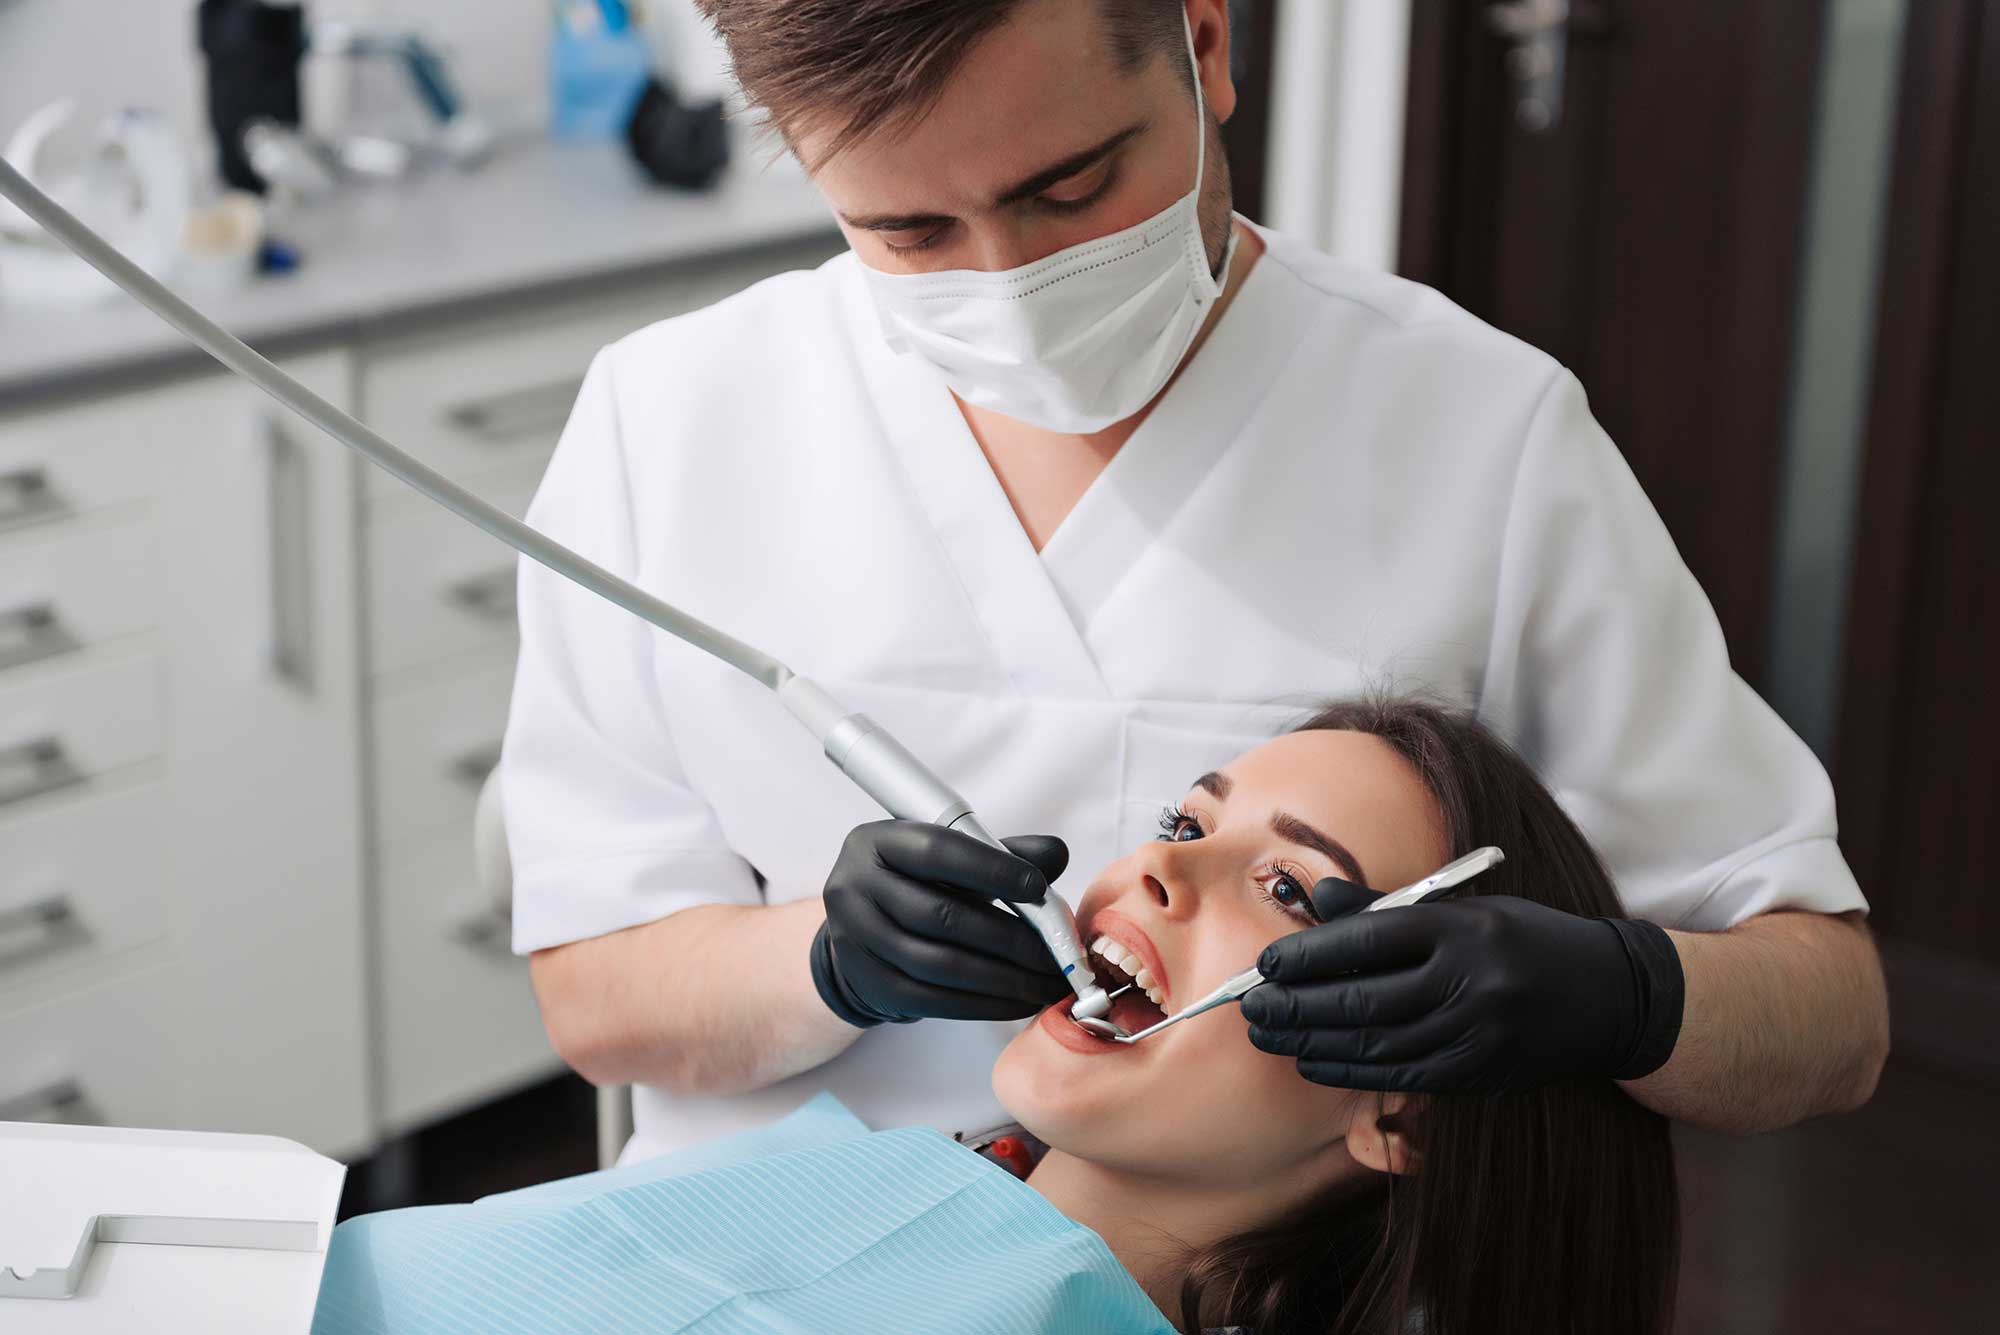 Statistics reveal 46% of NHS dentists want to go private